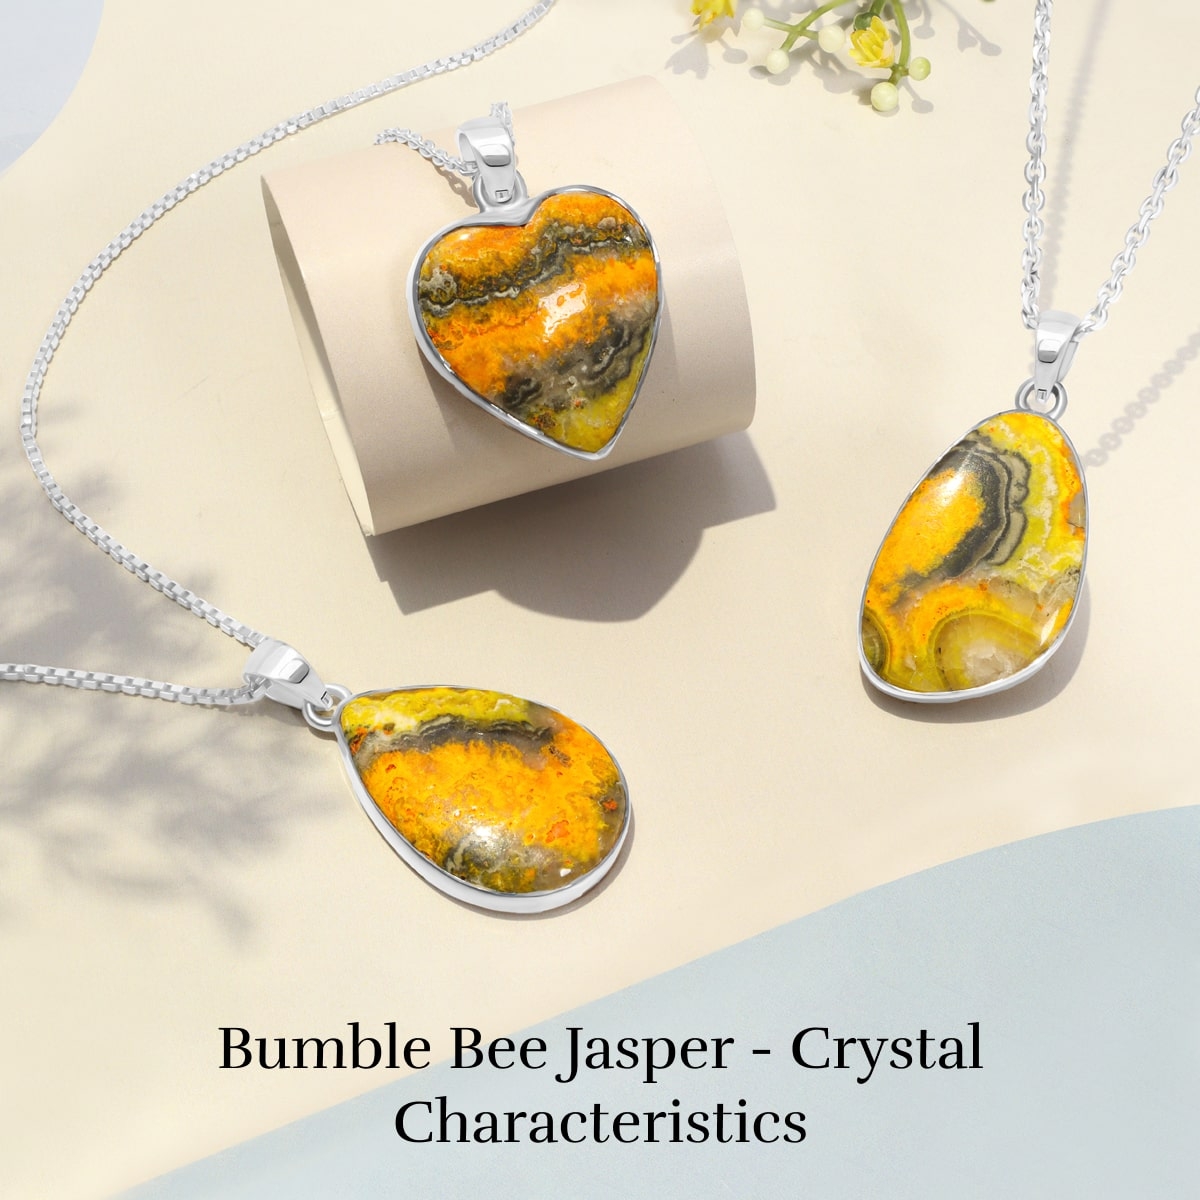 Physical Properties of Bumble Bee Jasper Crystal